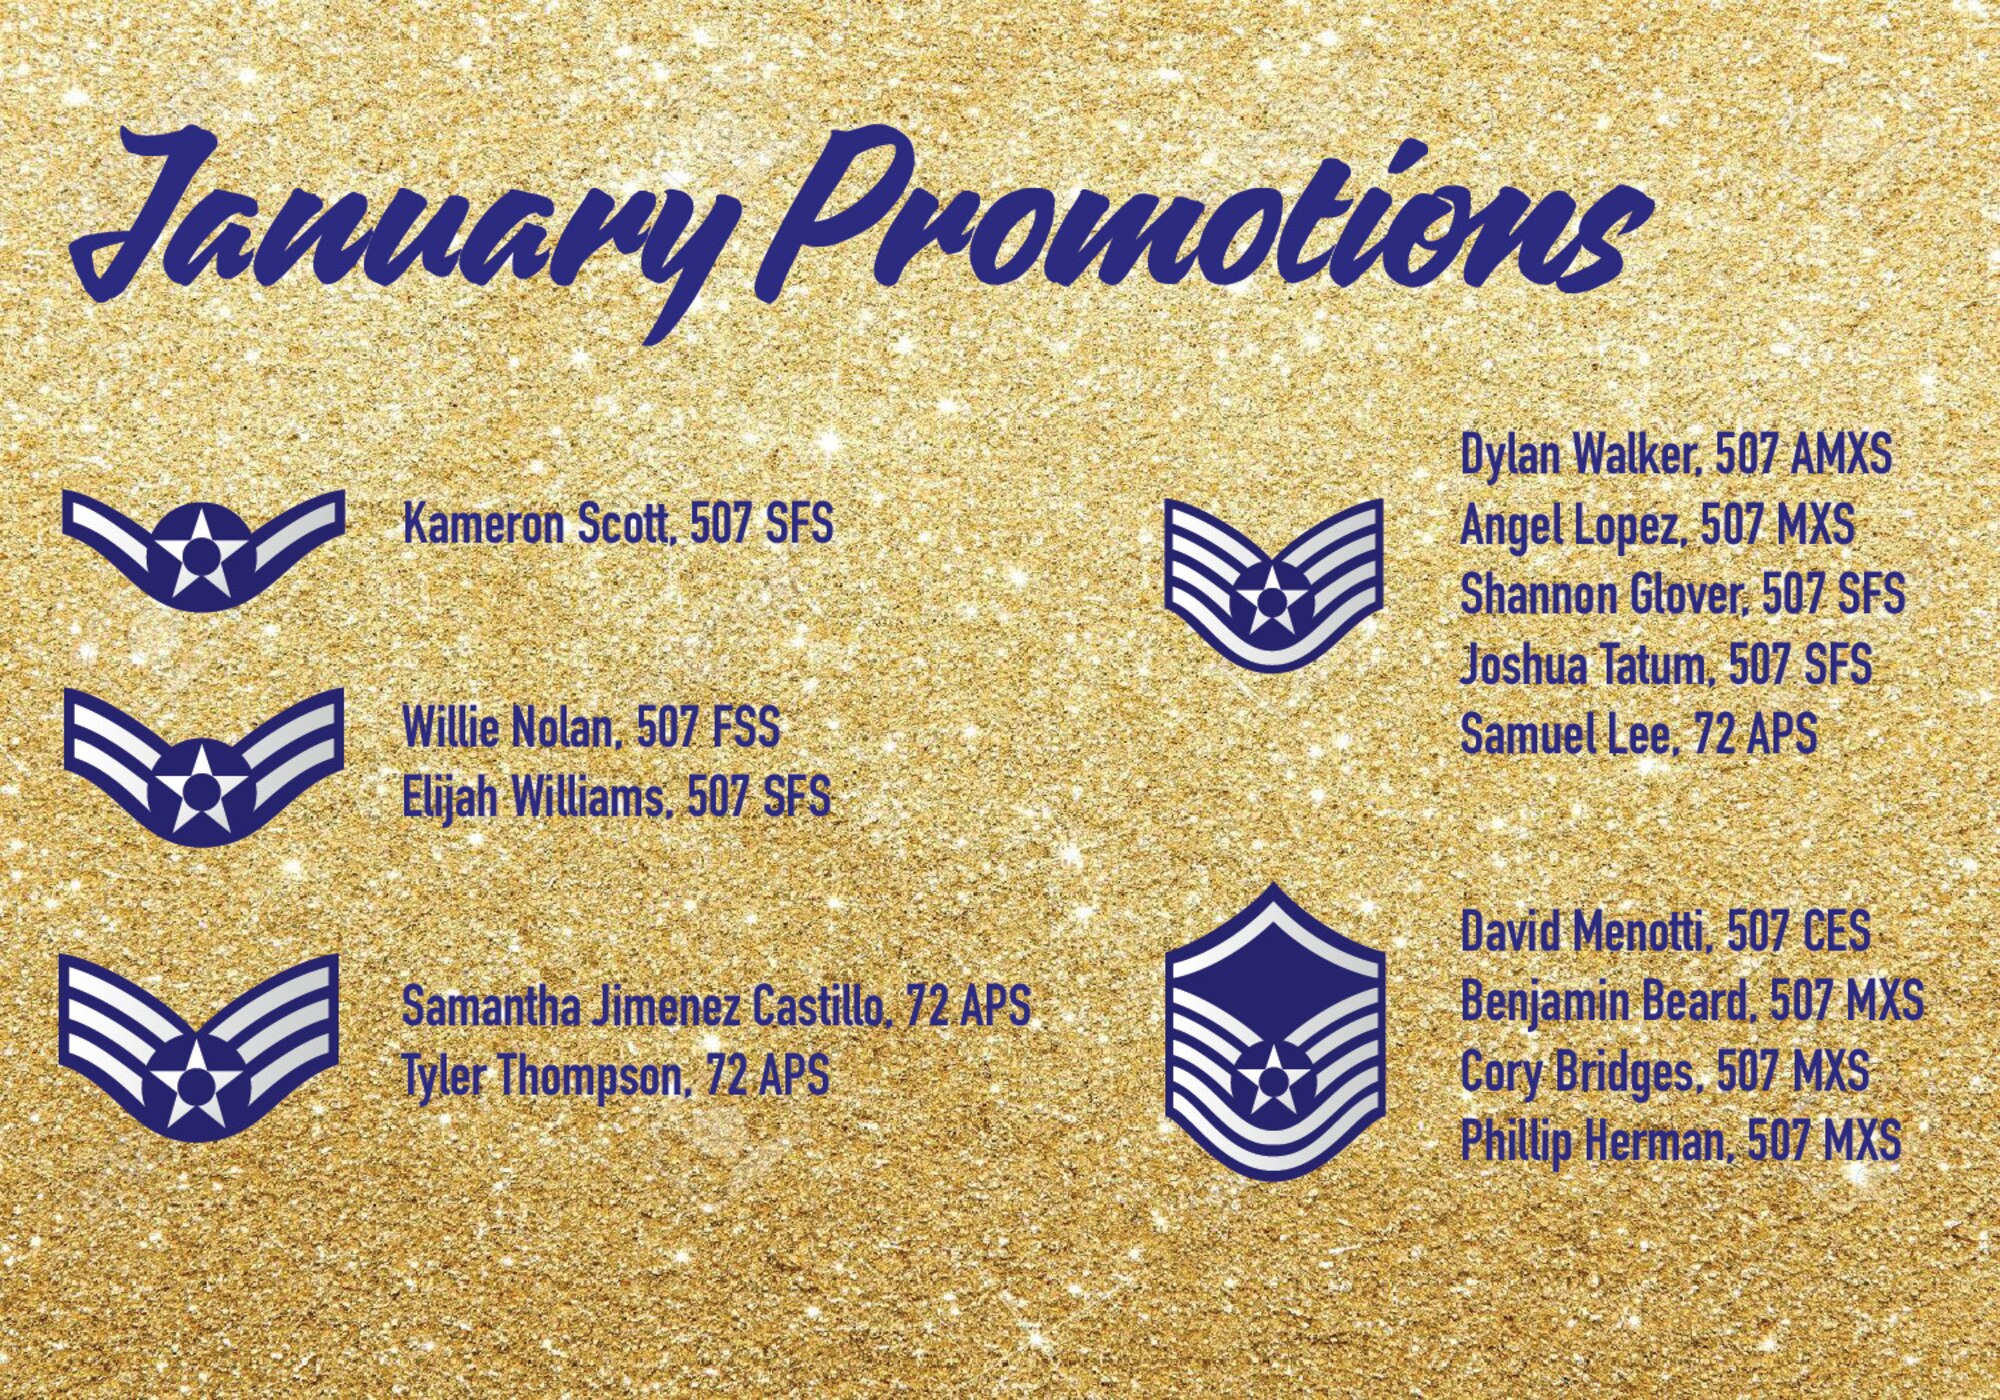 The January 2021 Enlisted Promotions graphic from the 507th Air Refueling Wing at Tinker Air Force Base, Oklahoma. (U.S. Air Force graphic by Senior Airman Mary Begy)